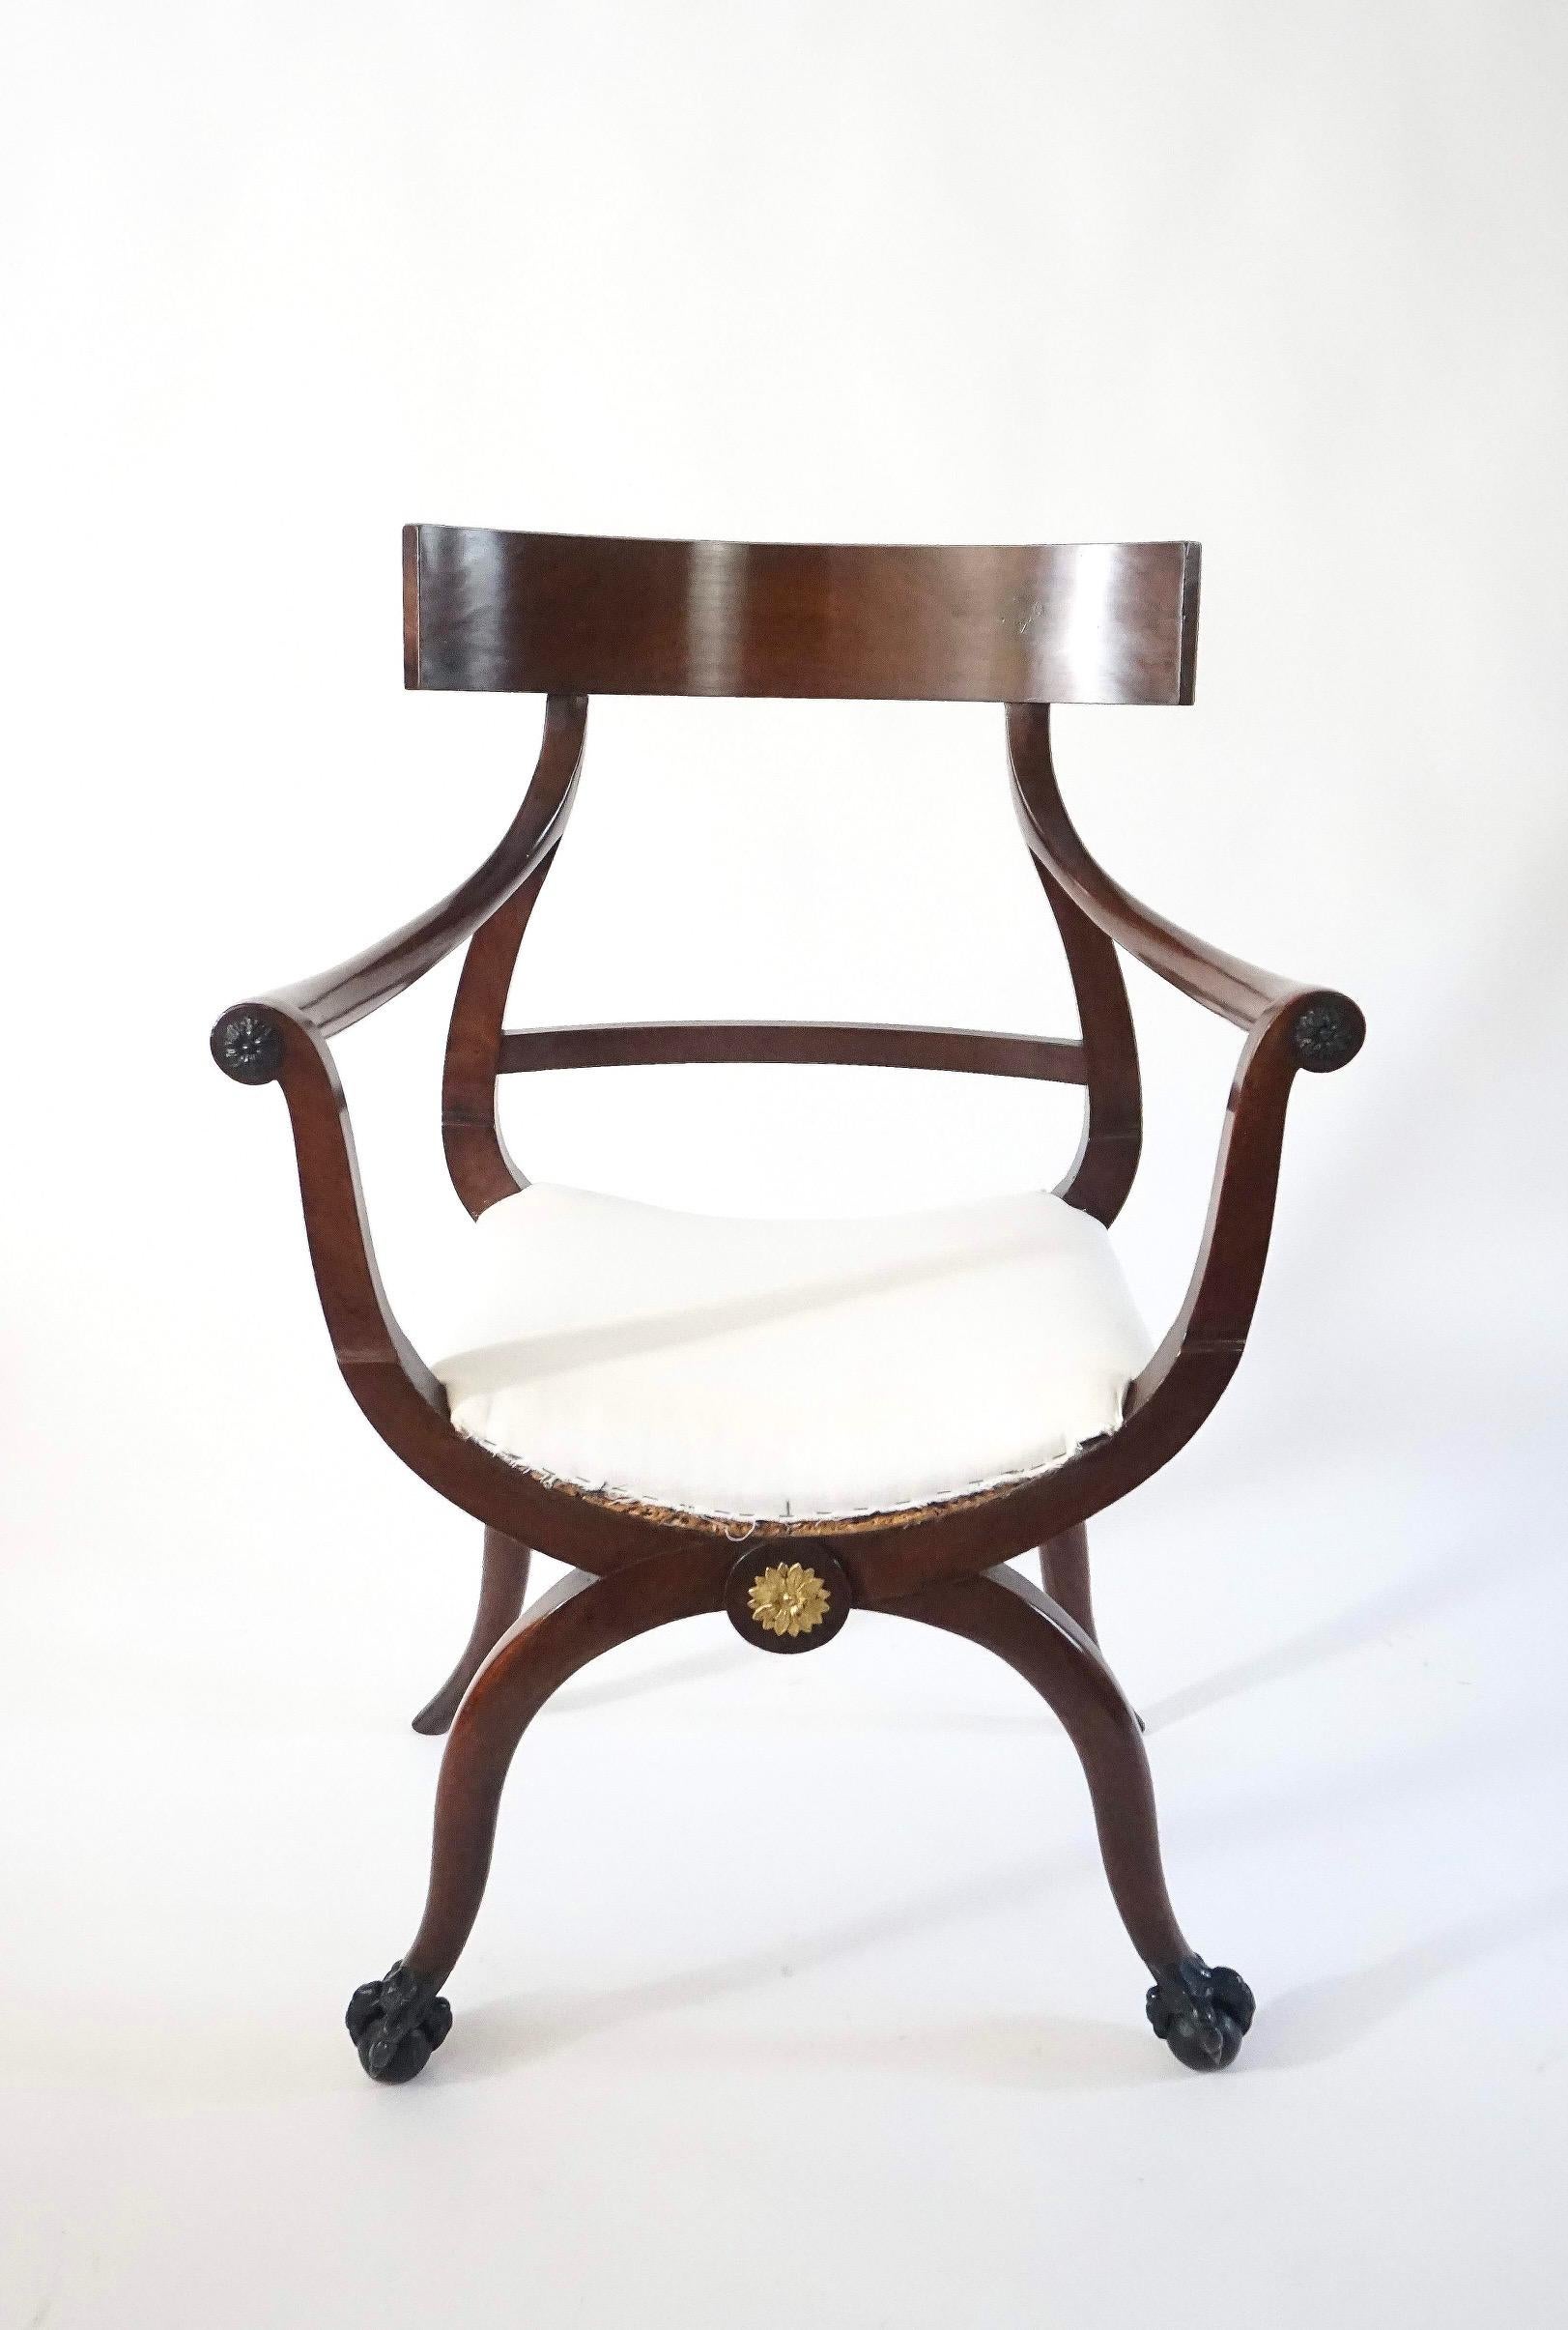 Russian Neoclassical Mahogany Armchairs, Pair, circa 1800 For Sale 1